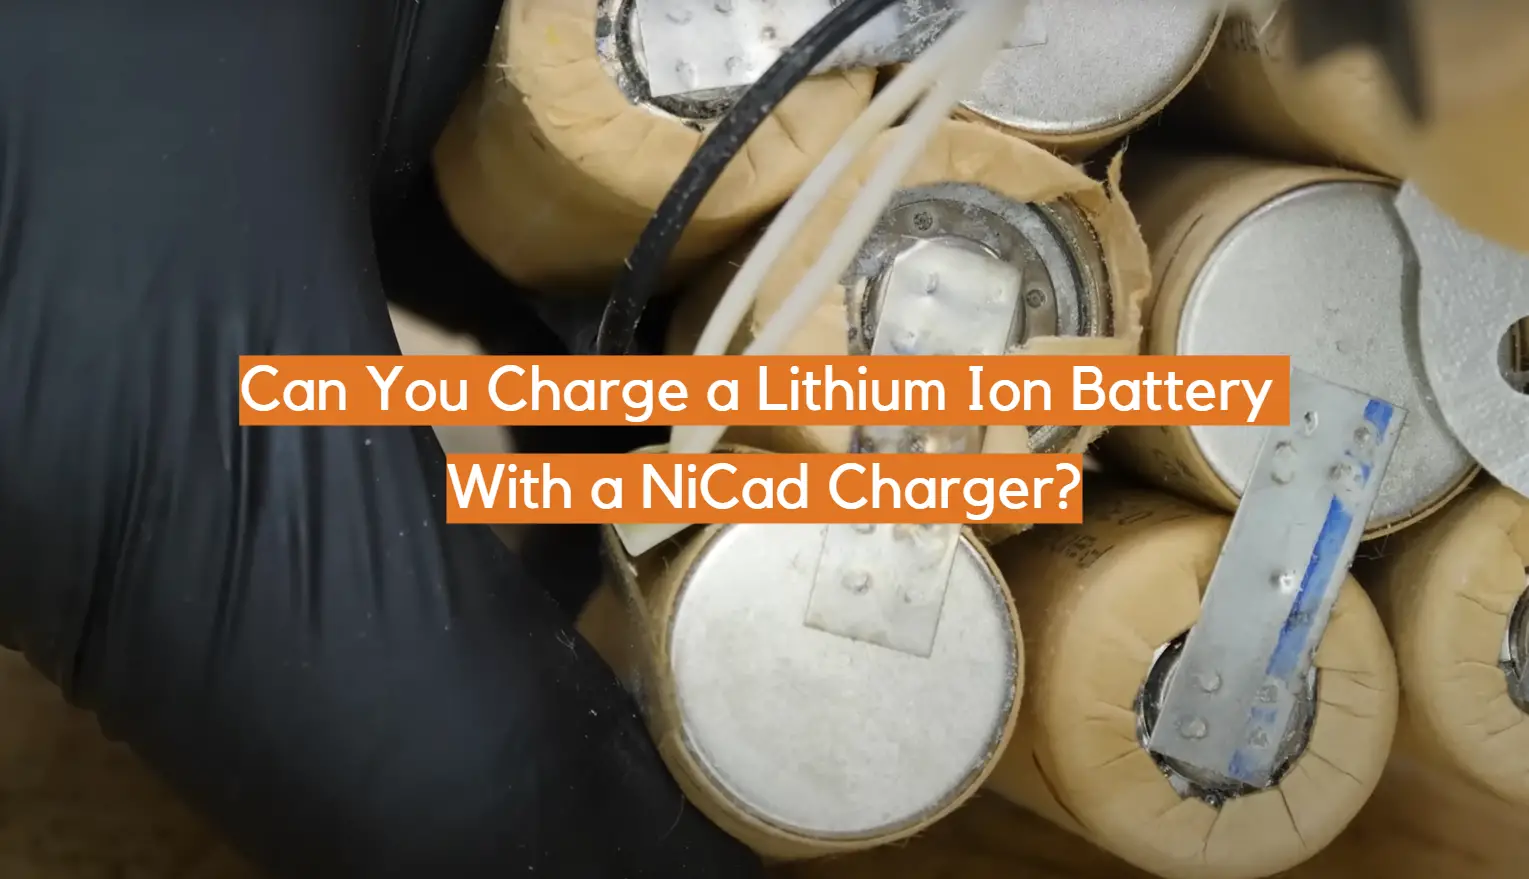 Can You Charge a Lithium Ion Battery With a NiCad Charger?